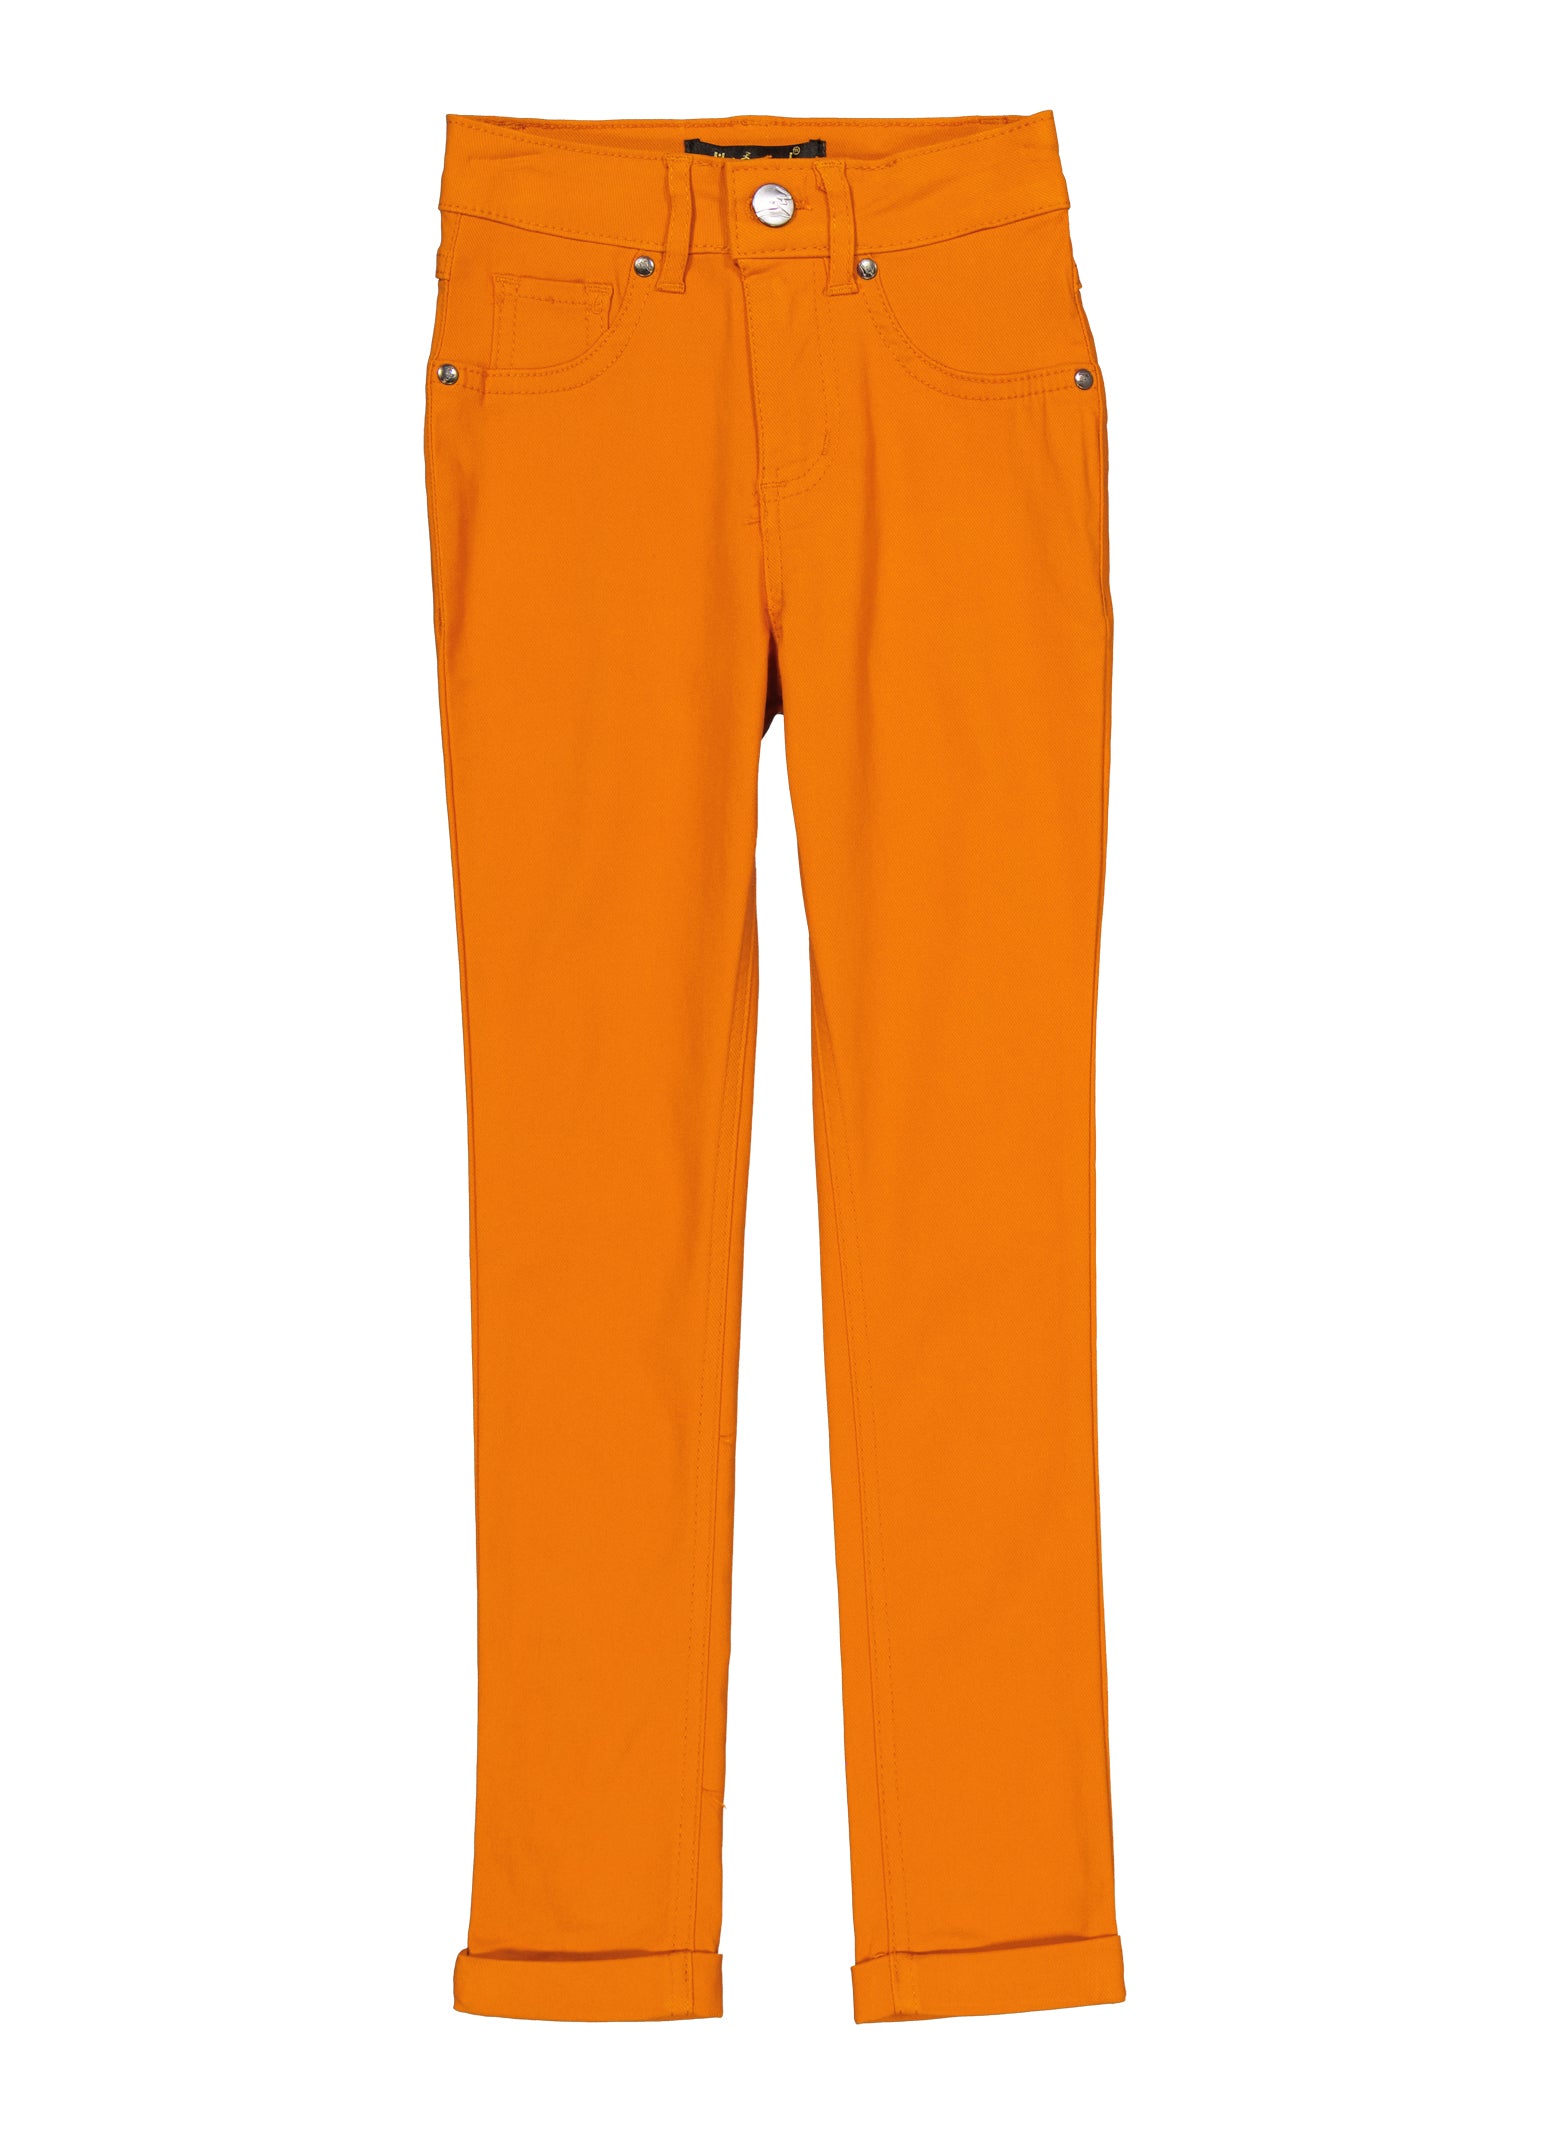 Girls Hyperstretch Fixed Cuff Pants